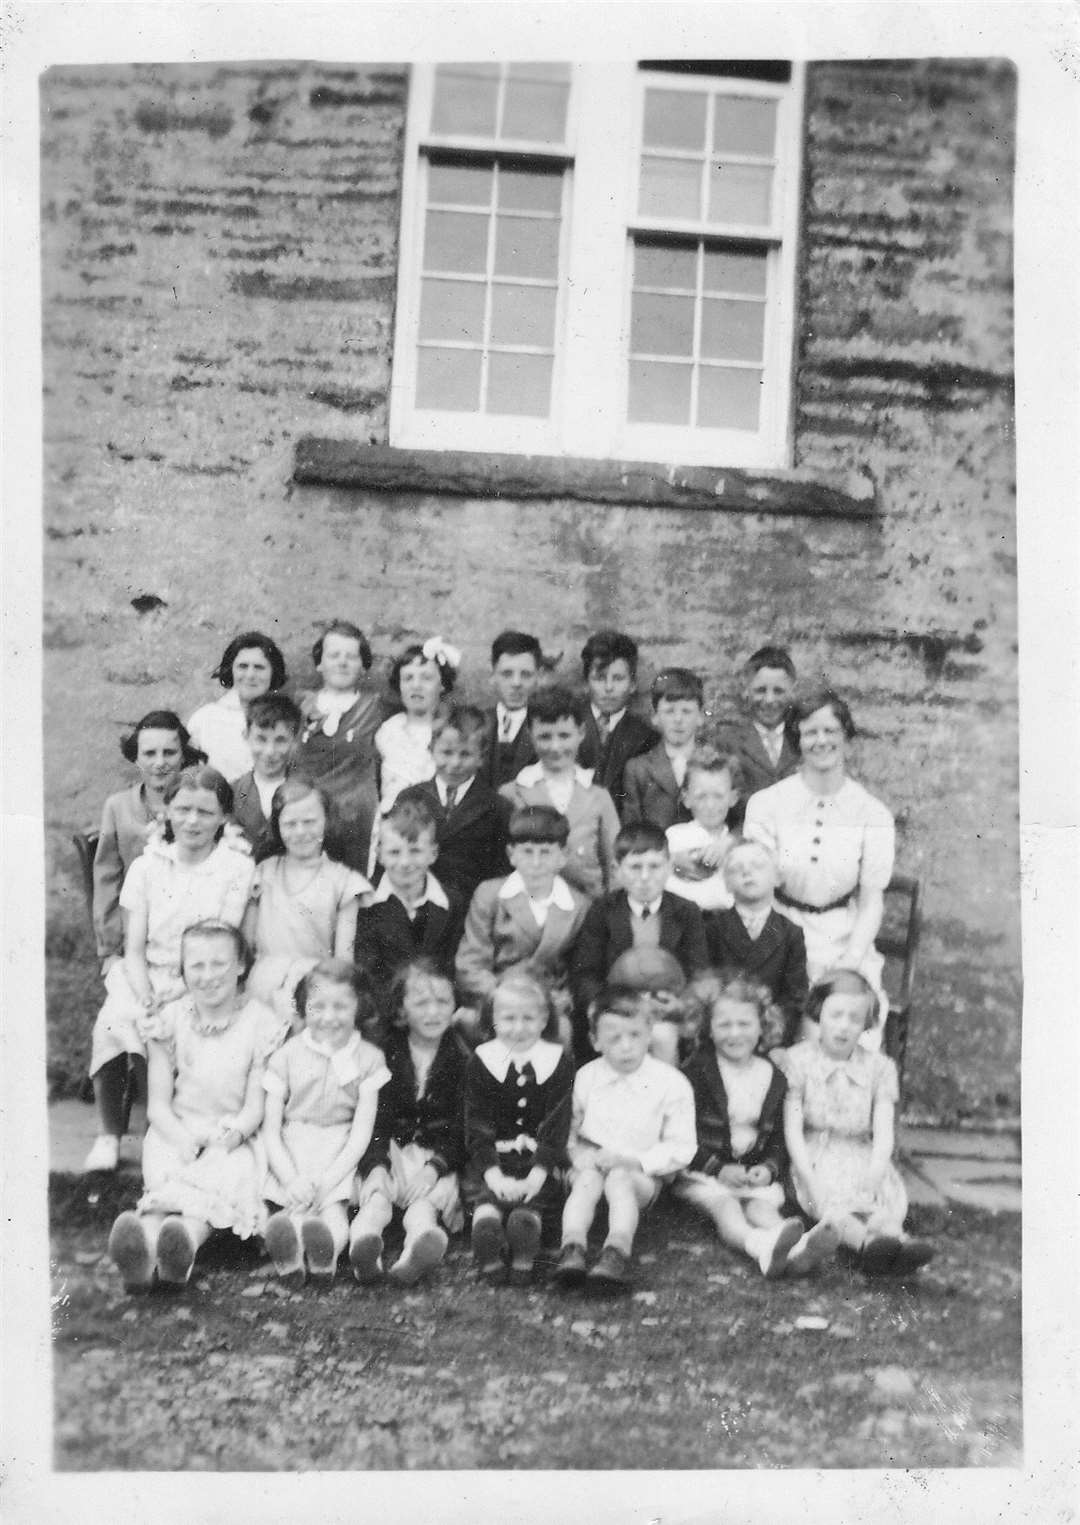 Miss Munro and her pupils at Scotscalder. The school closed in 1962, one of many rural schools that had to shut their doors as their catchments dwindled and transport improved. (Linda Munro)